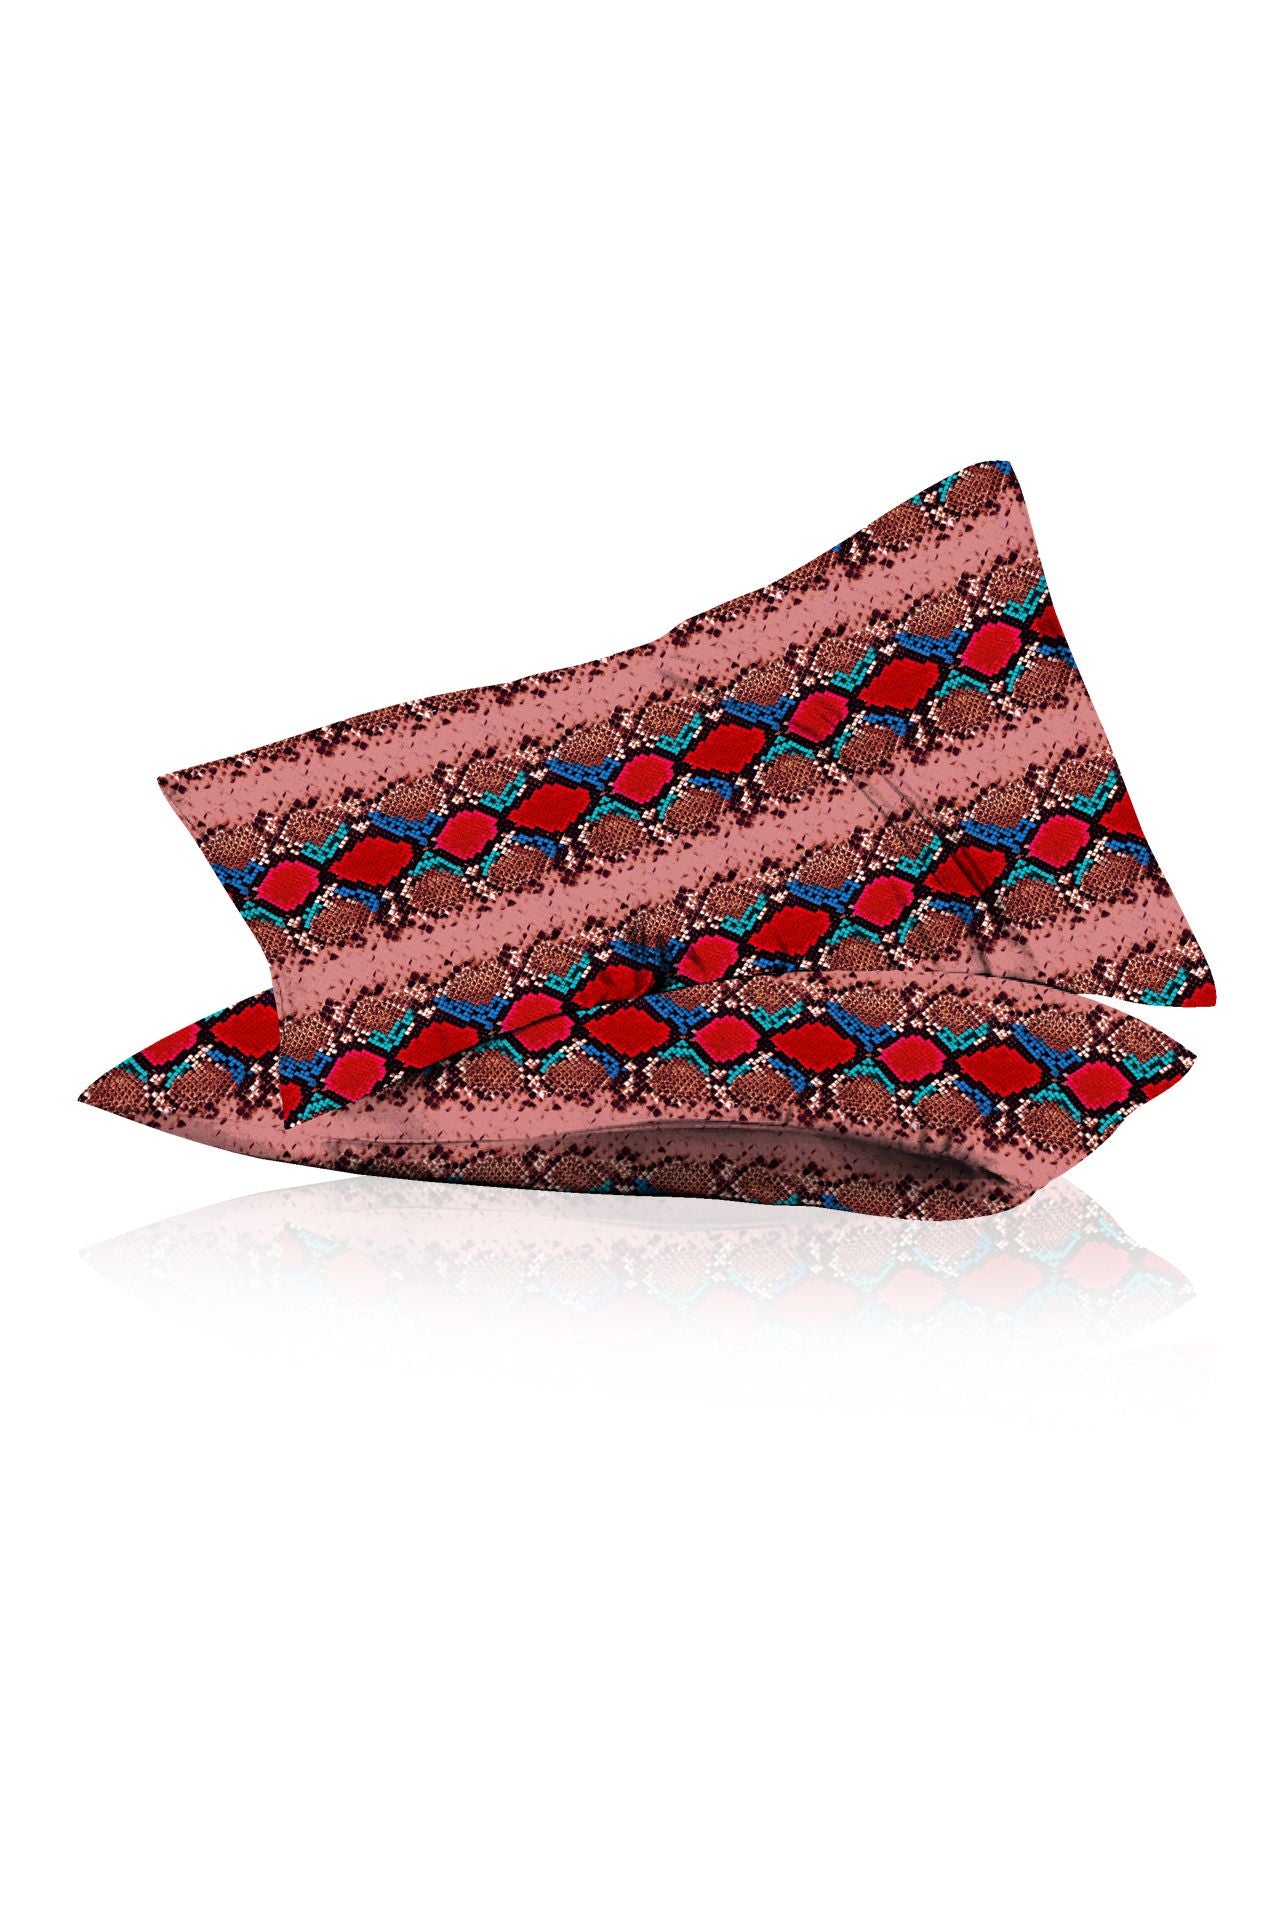 Red Pillow Cover with Biodegradable Fabrics